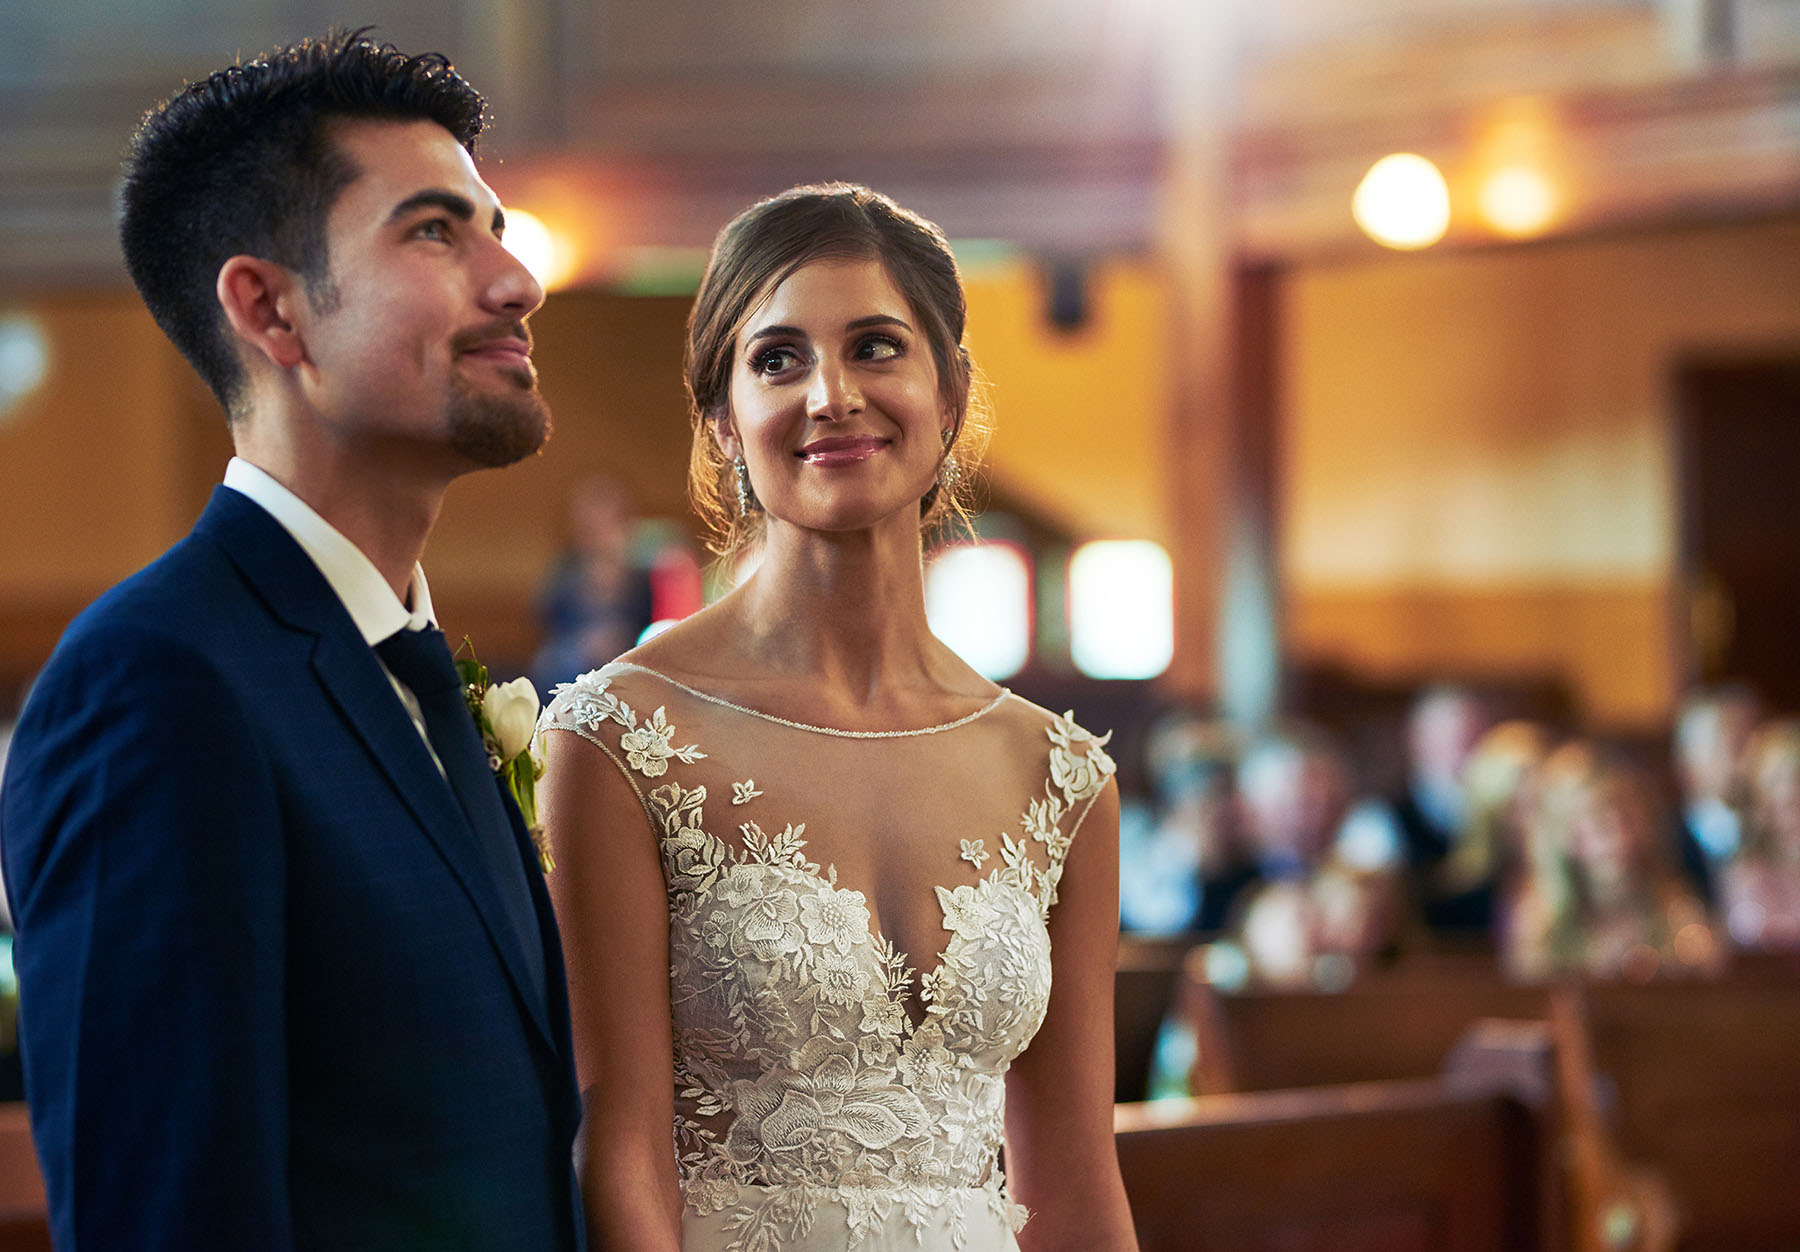 Smiling bride and groom stand side by side in front of congregation.